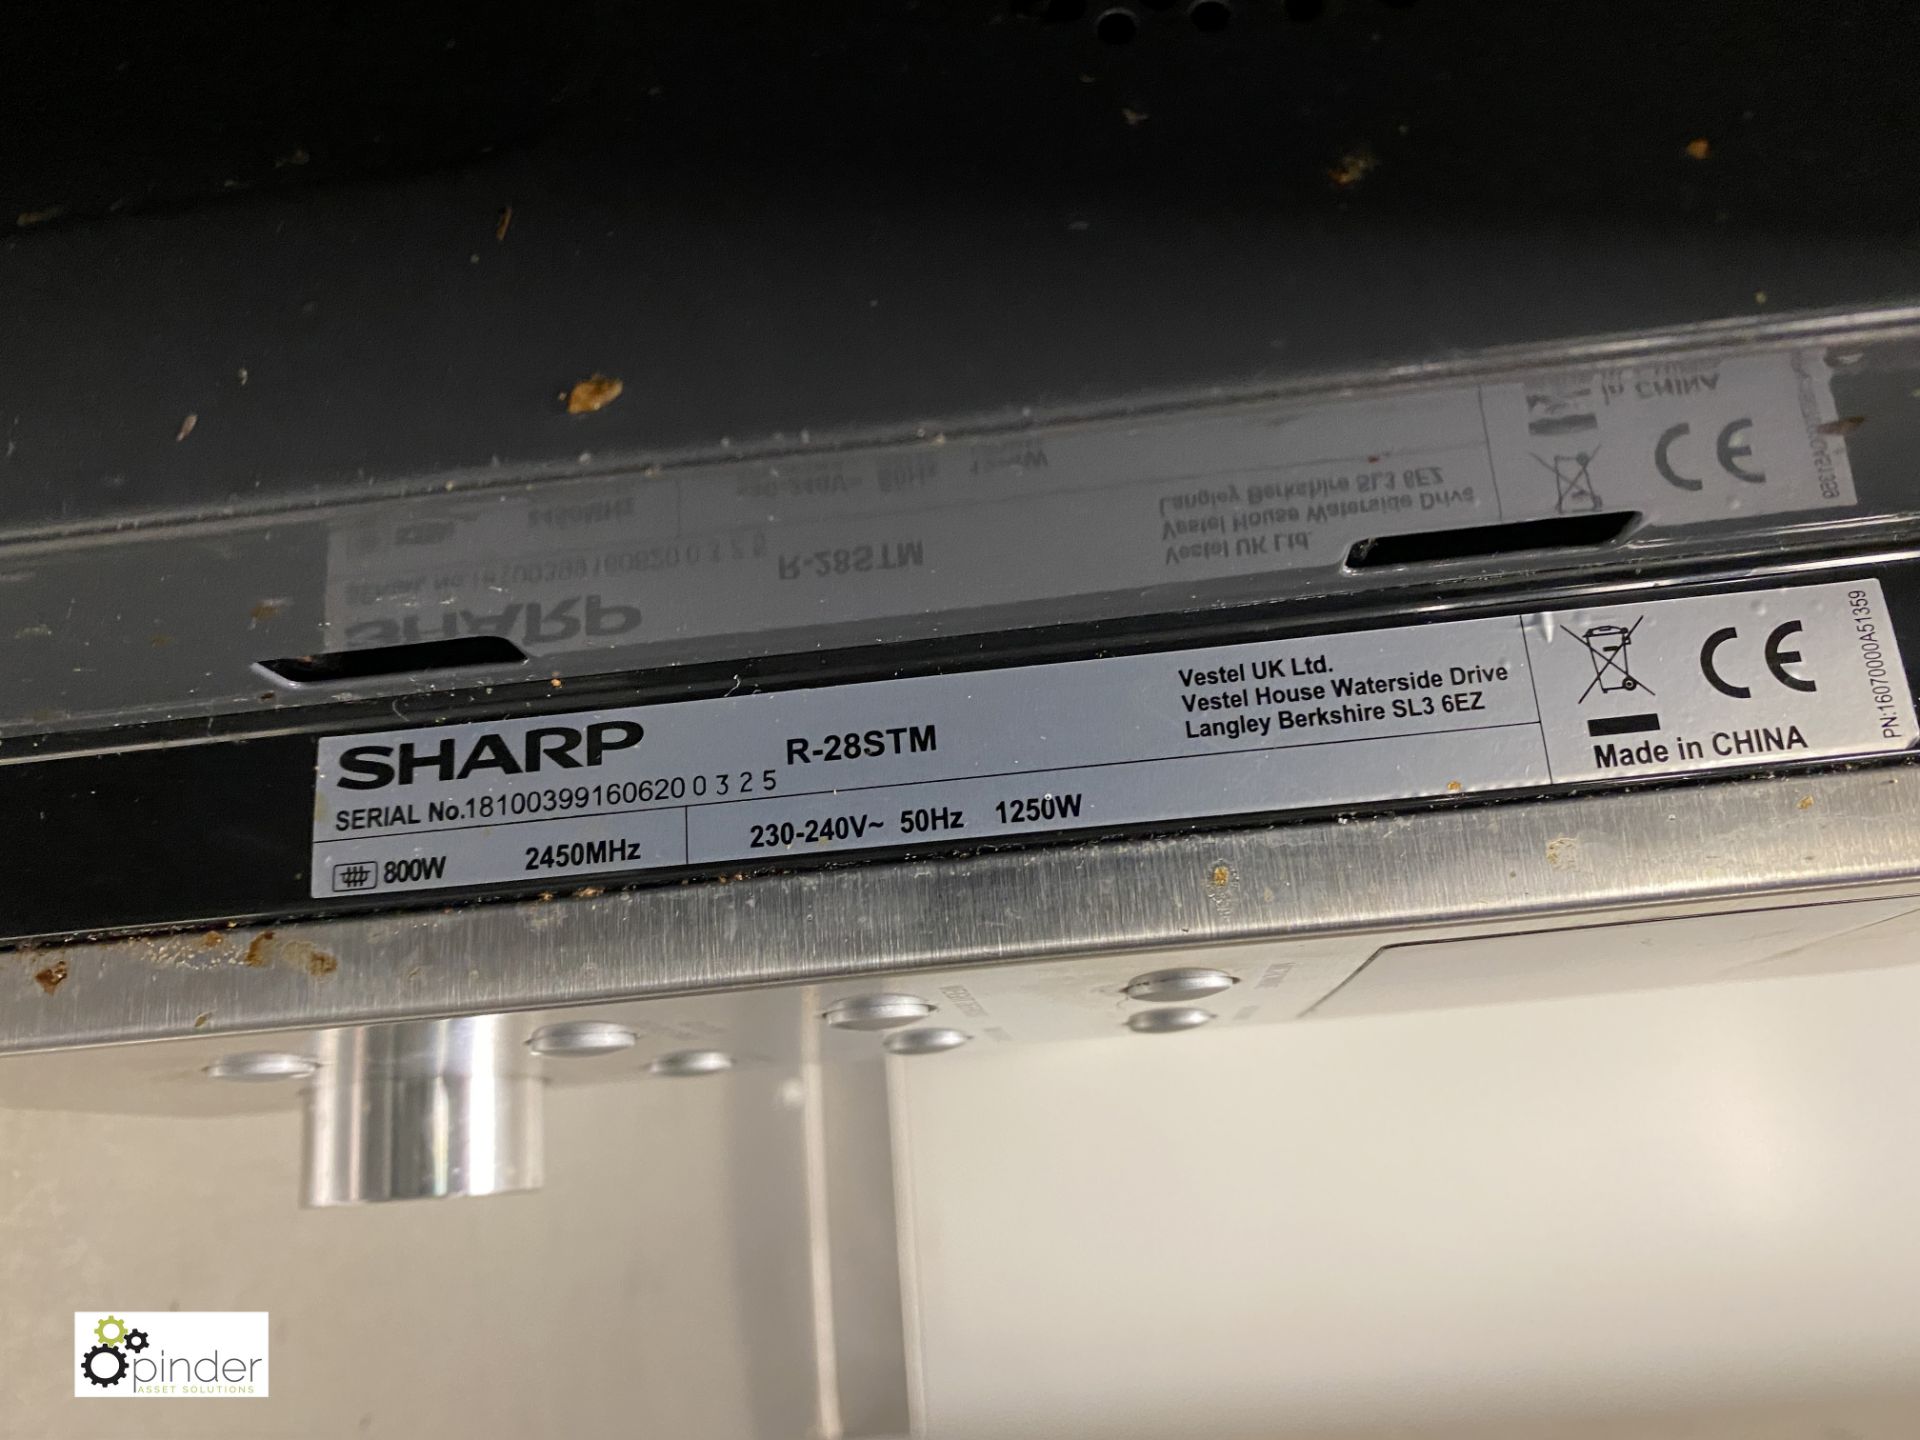 Sharp stainless steel Microwave Oven (lot location – Group Hospitality Kitchen – ground floor) - Image 3 of 4